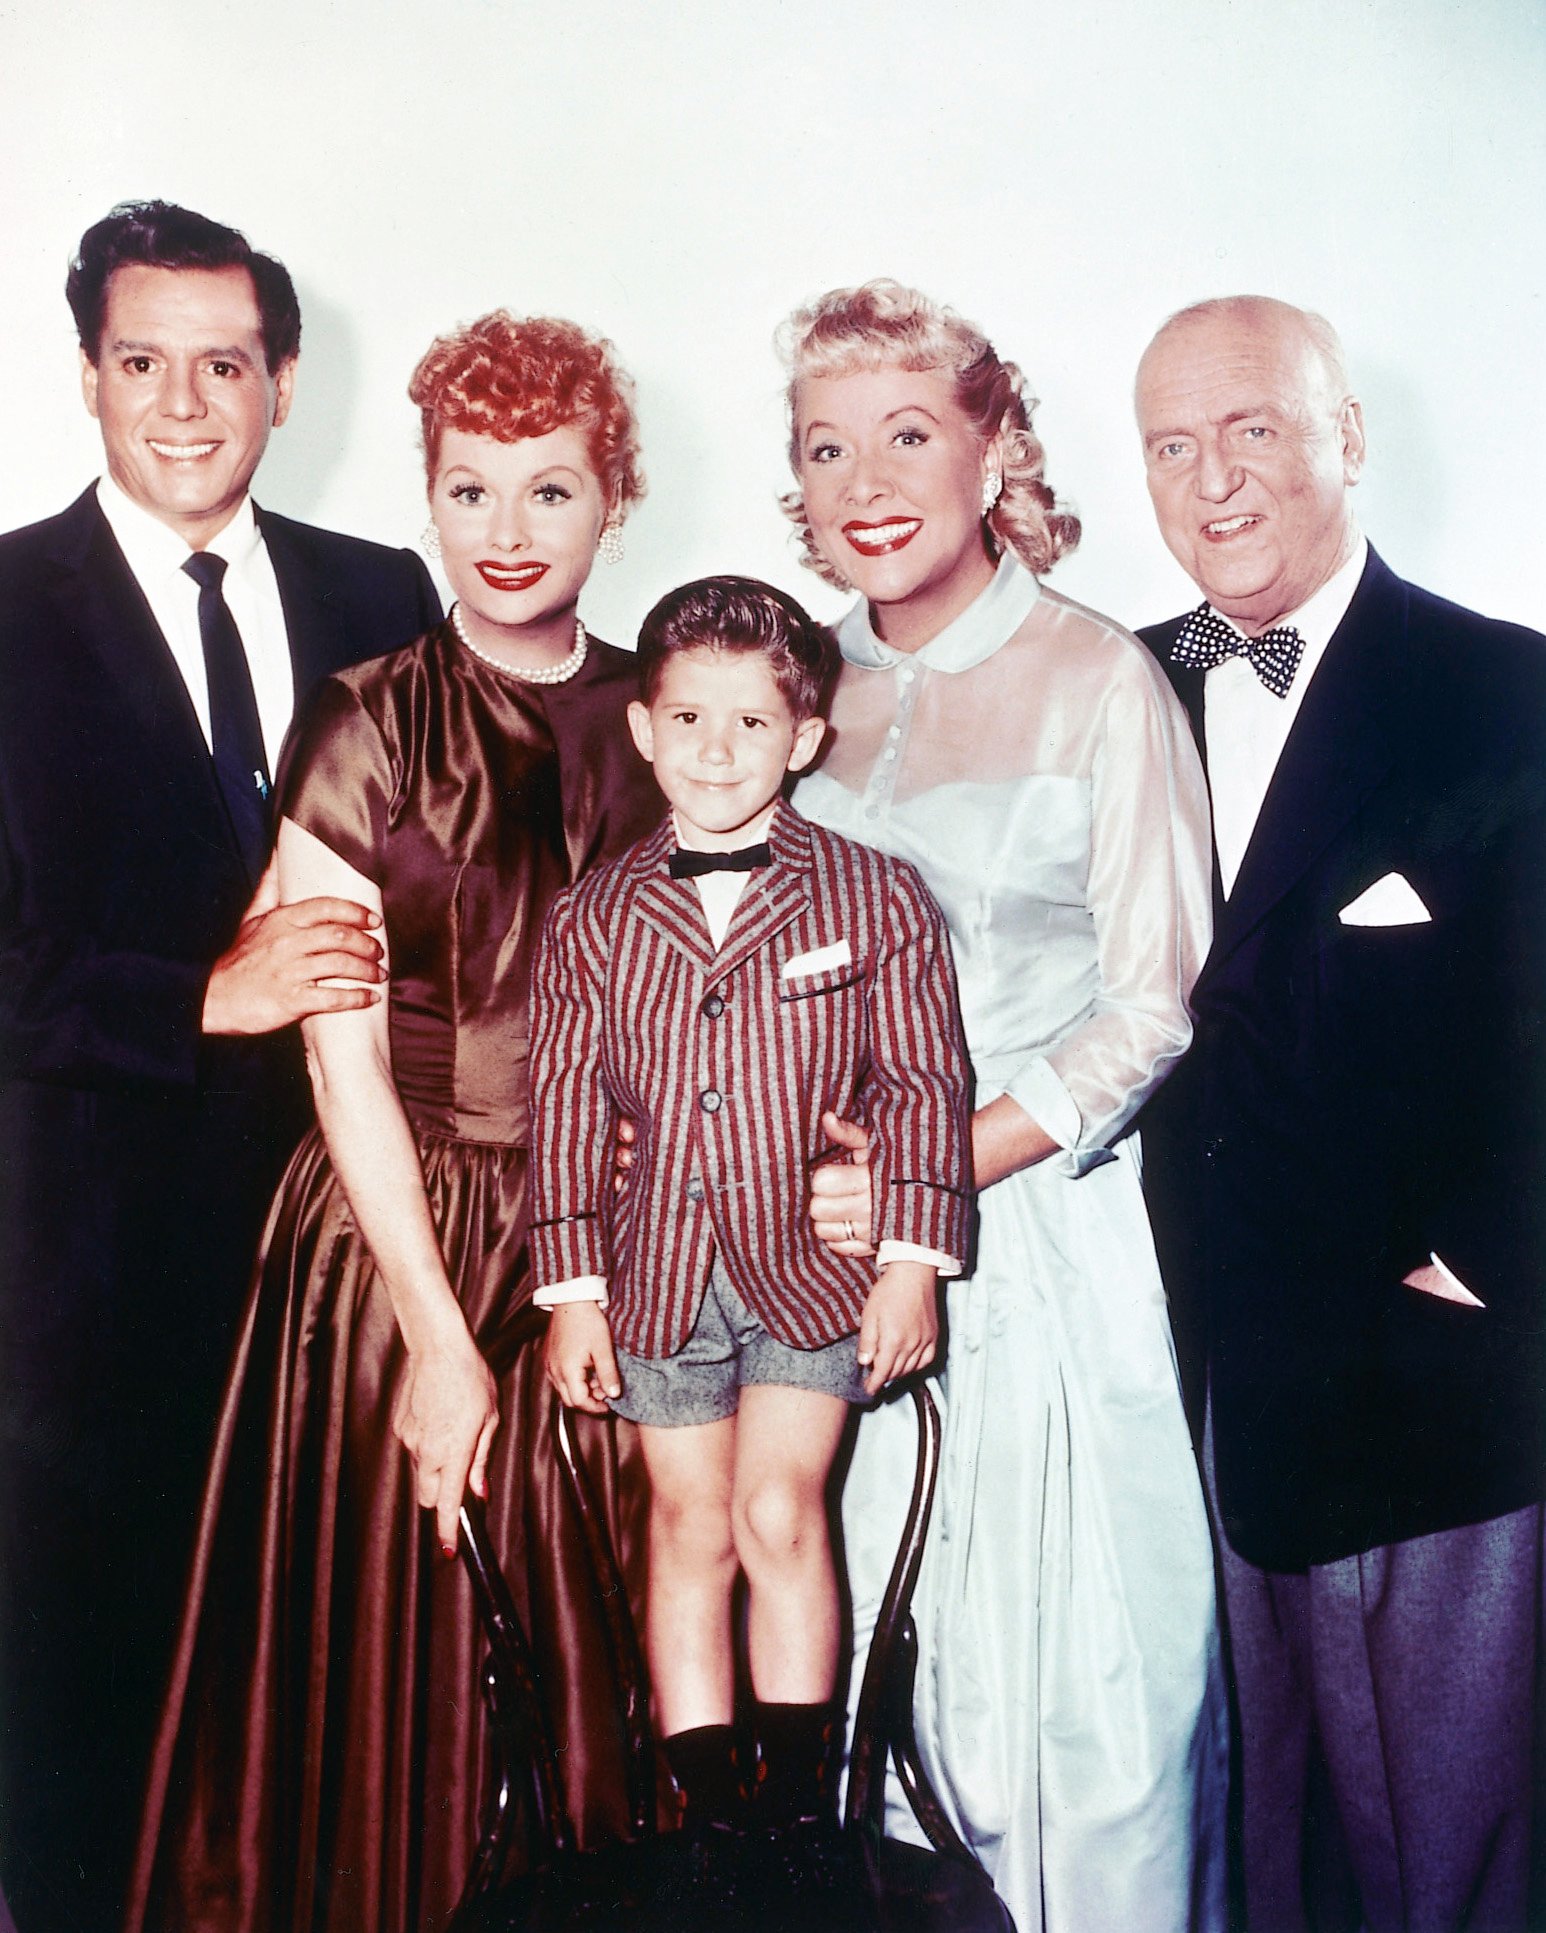 Keith Thibodeaux, center, with the cast of 'I Love Lucy', 1955